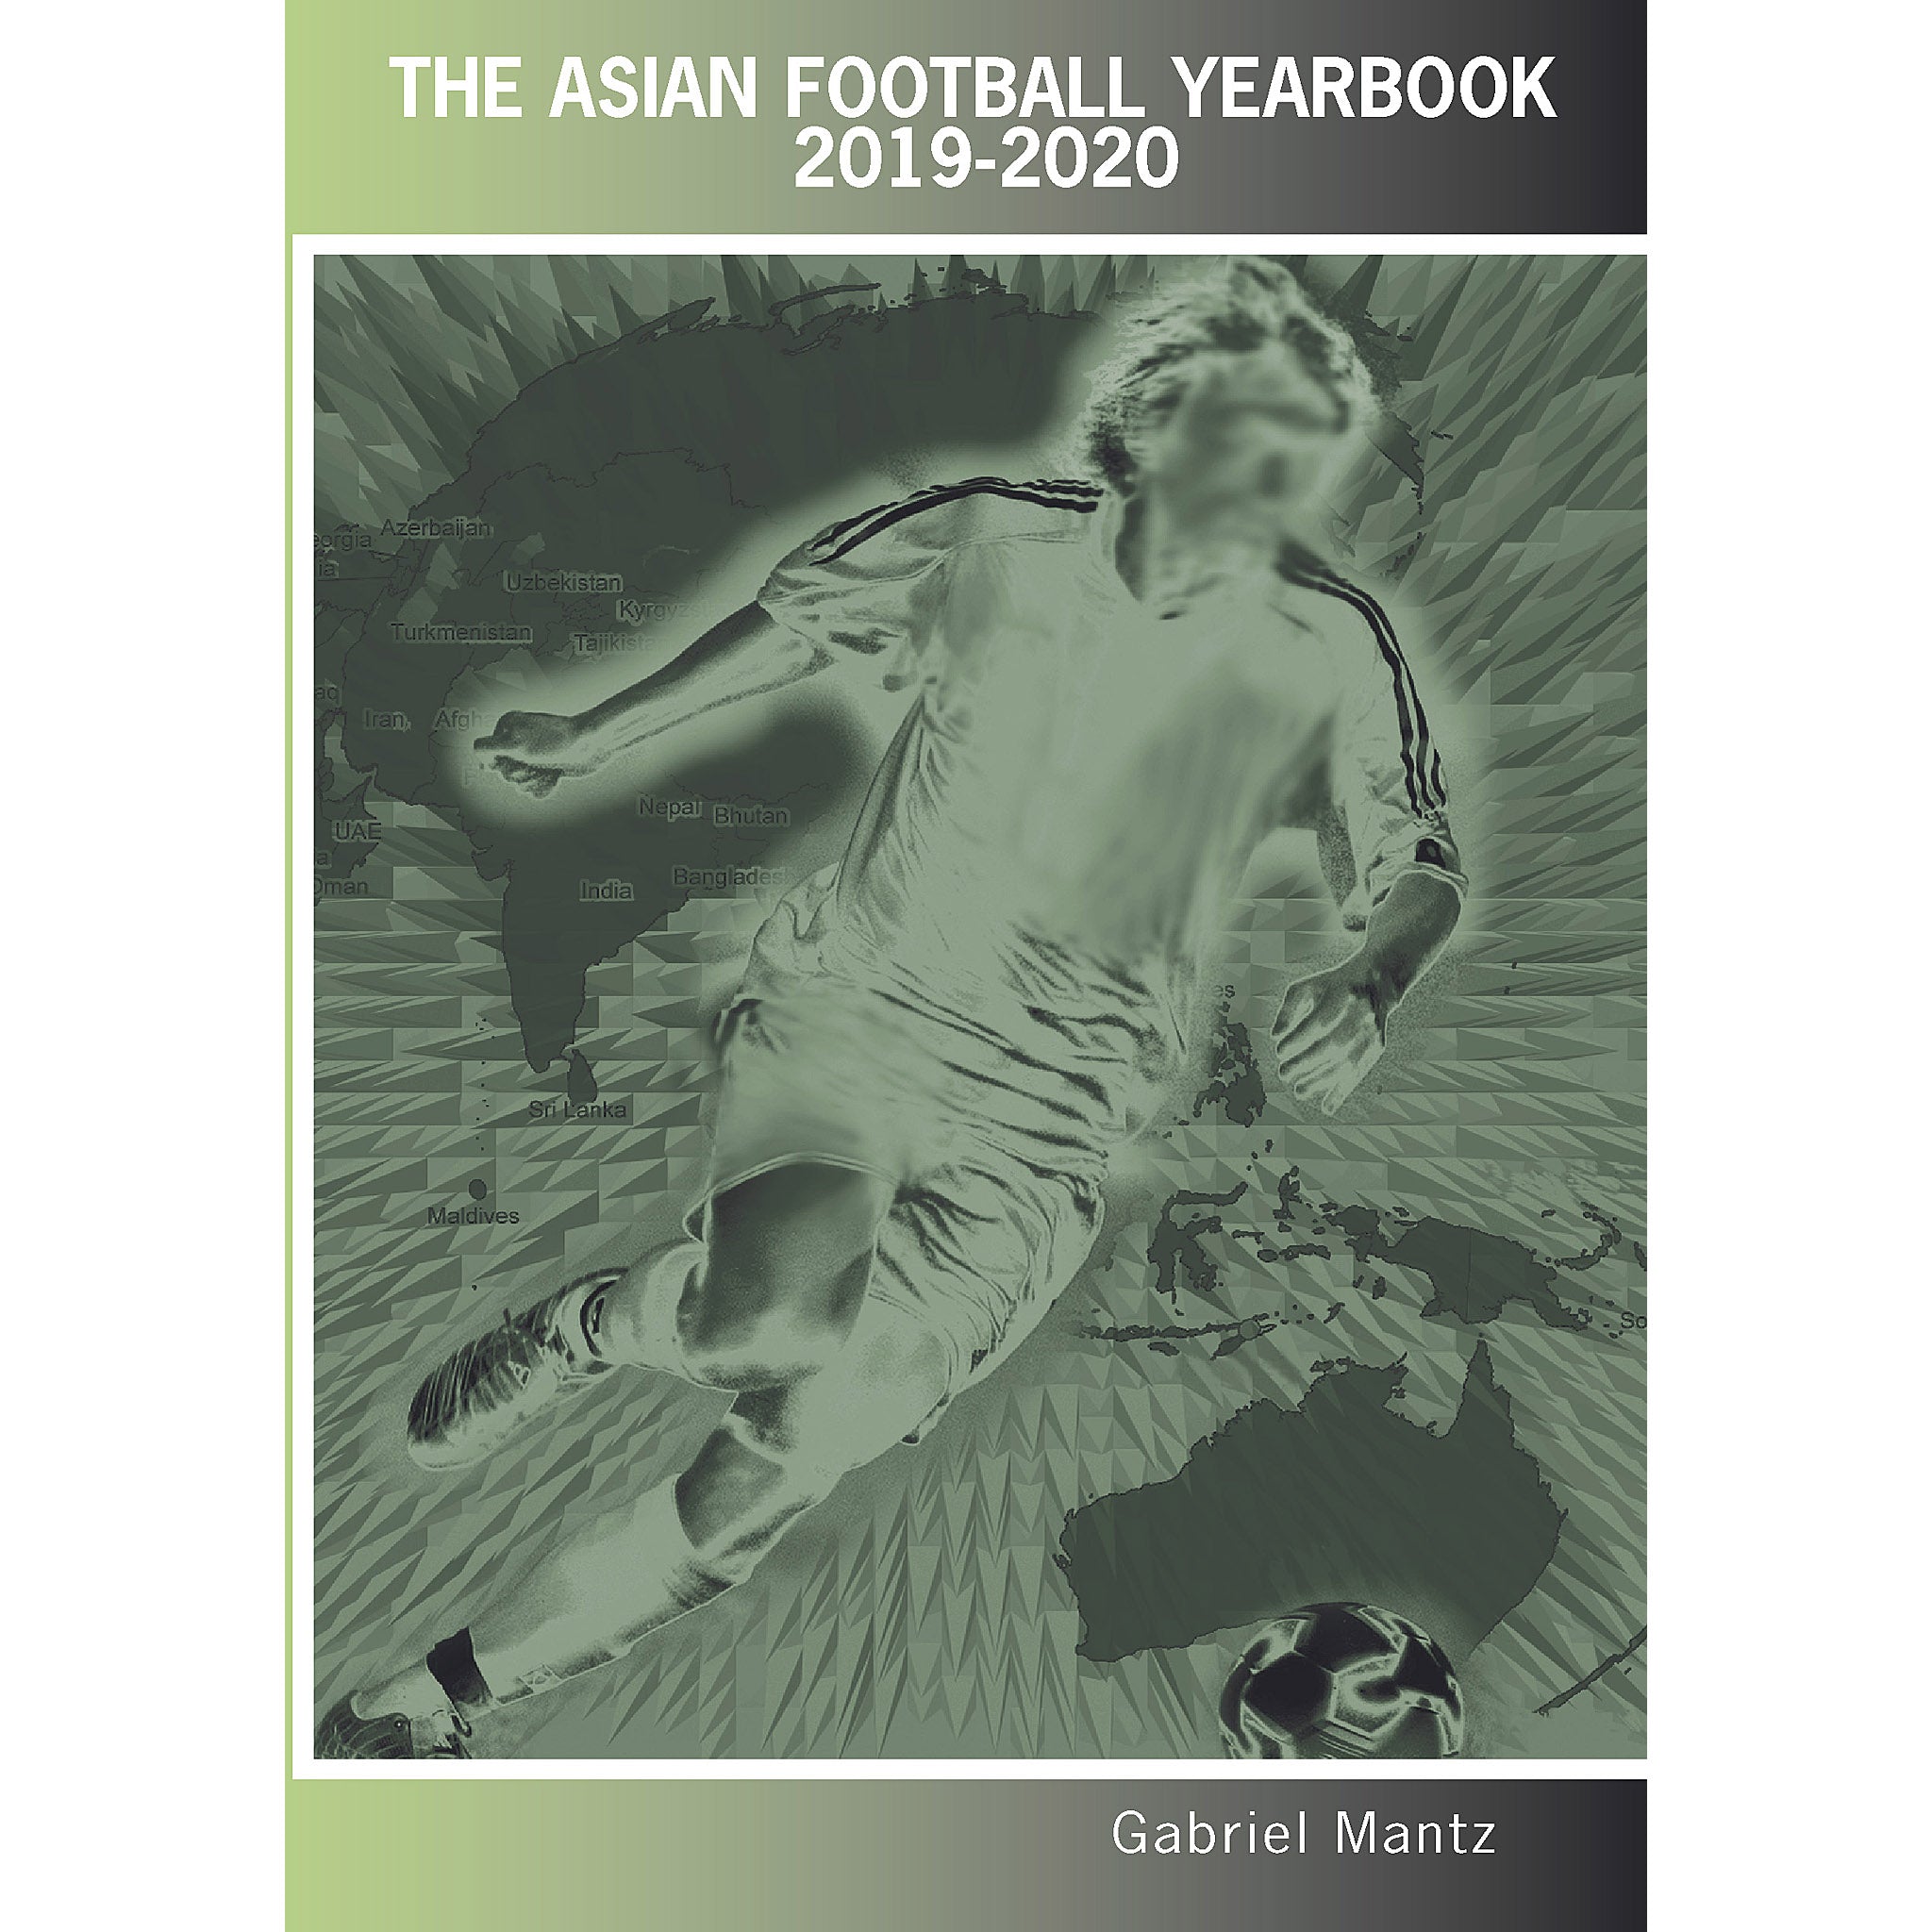 The Asian Football Yearbook 2019-2020